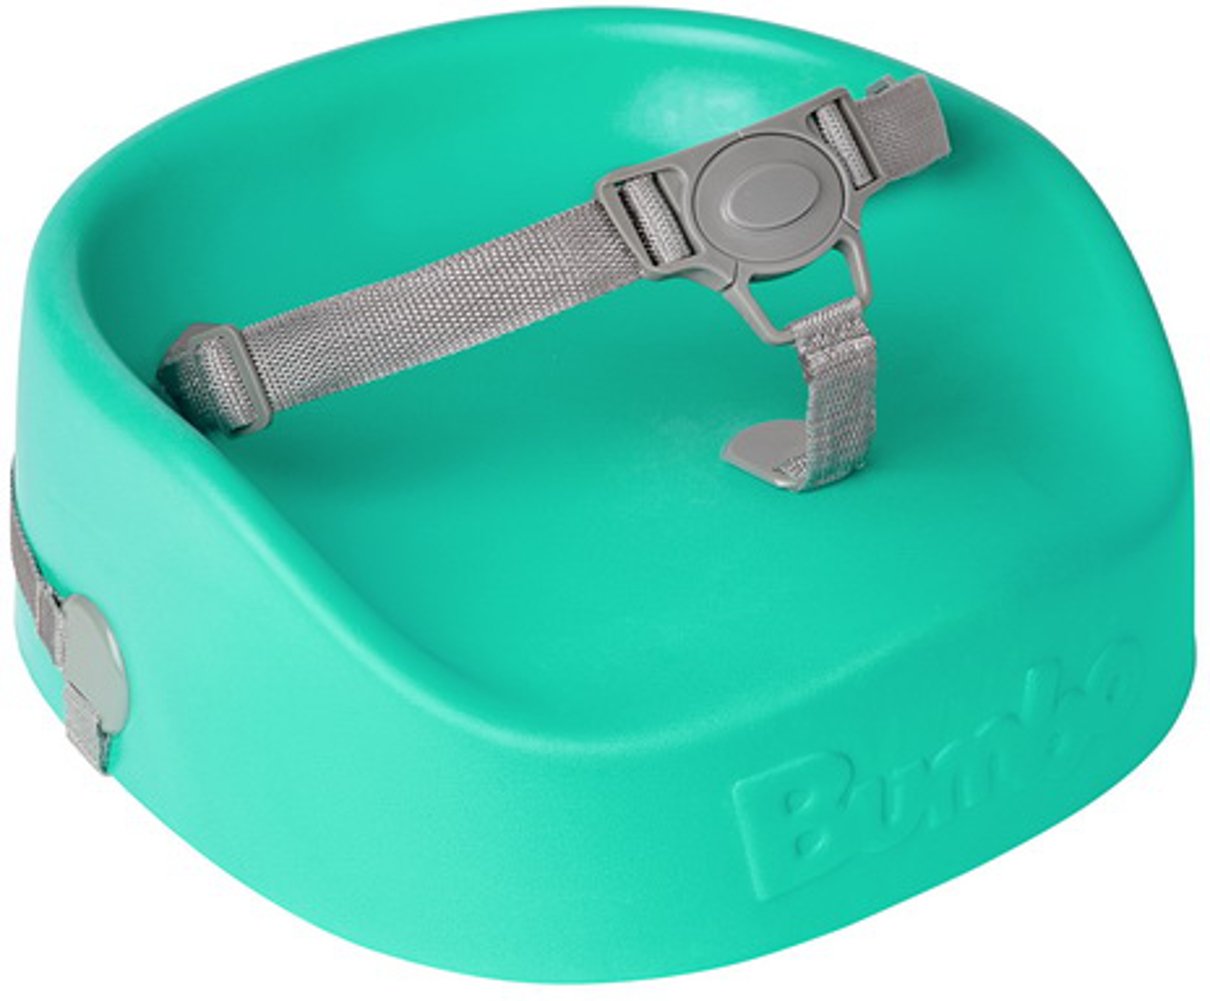 Bumbo Best Toddler Booster Seat